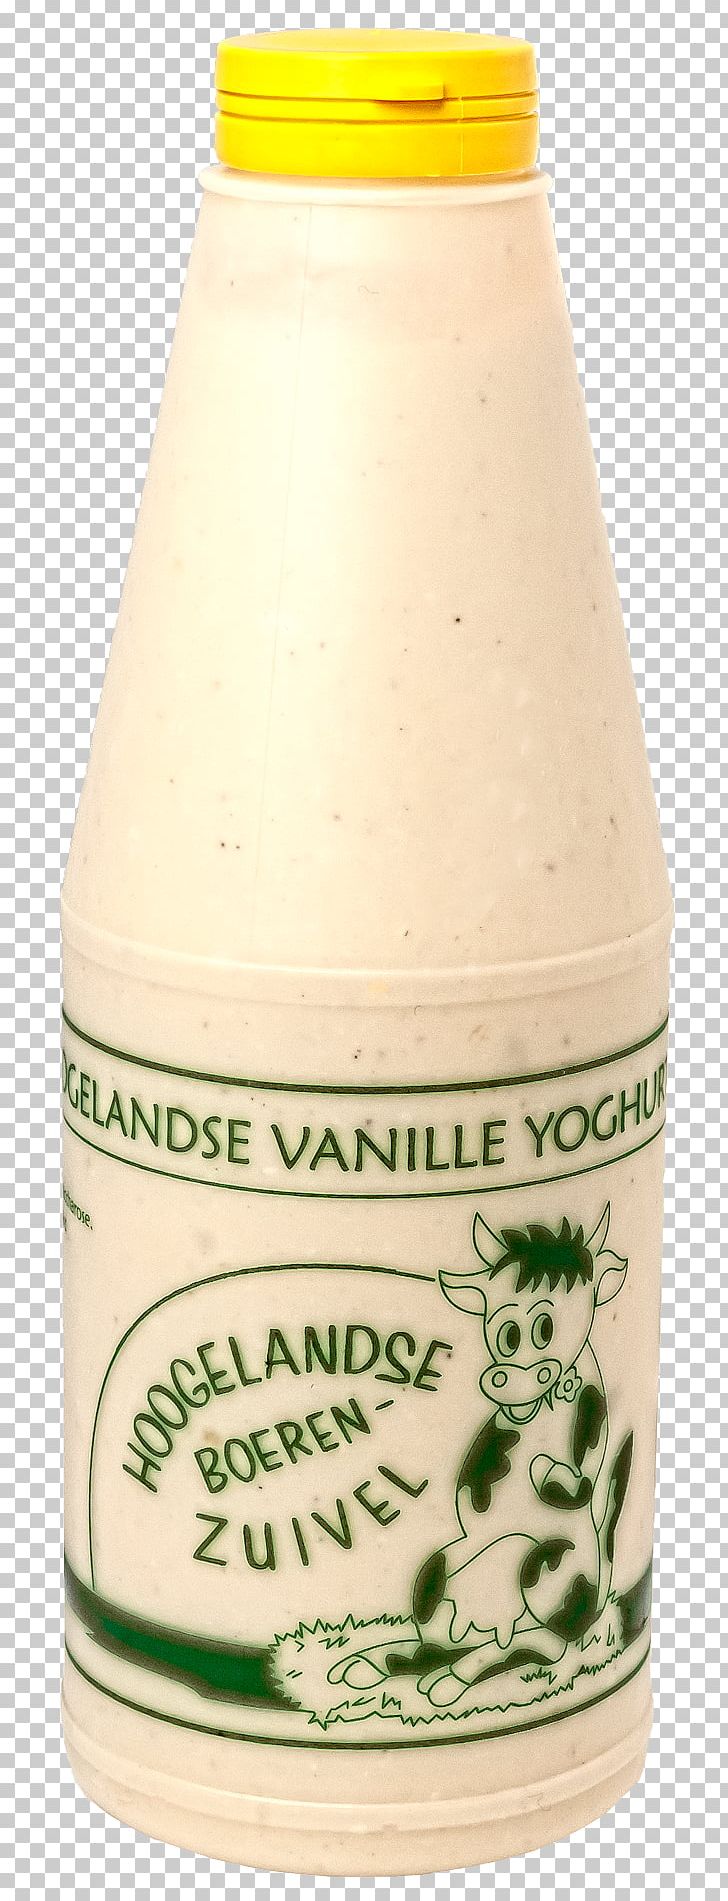 Buttermilk Vla Dairy Products Yoghurt PNG, Clipart, Butter, Buttermilk, Chocolate, Condiment, Dairy Products Free PNG Download